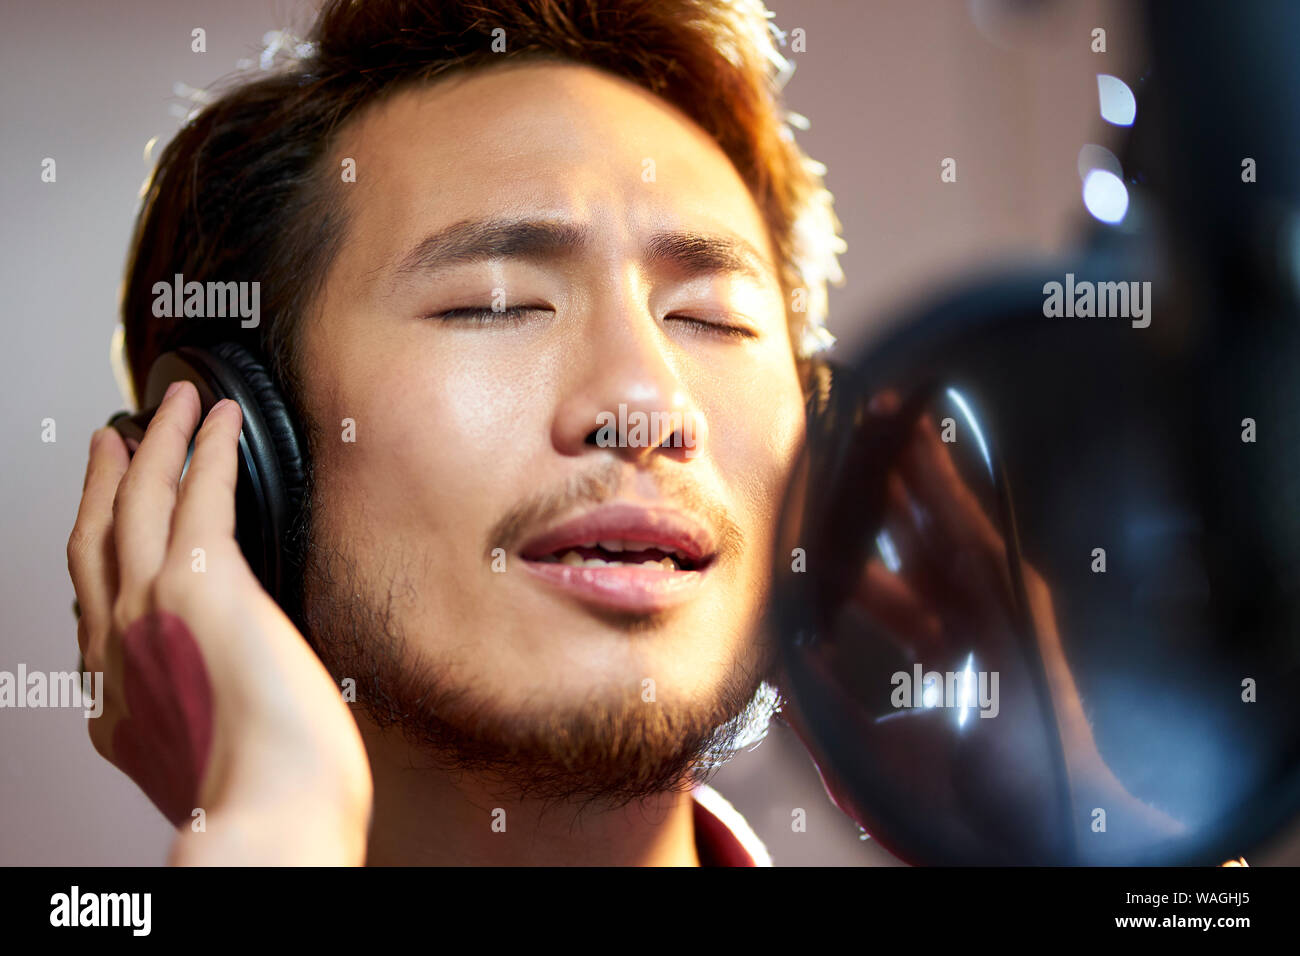 young asian adult man enjoying singing a song in modern recording studio Stock Photo